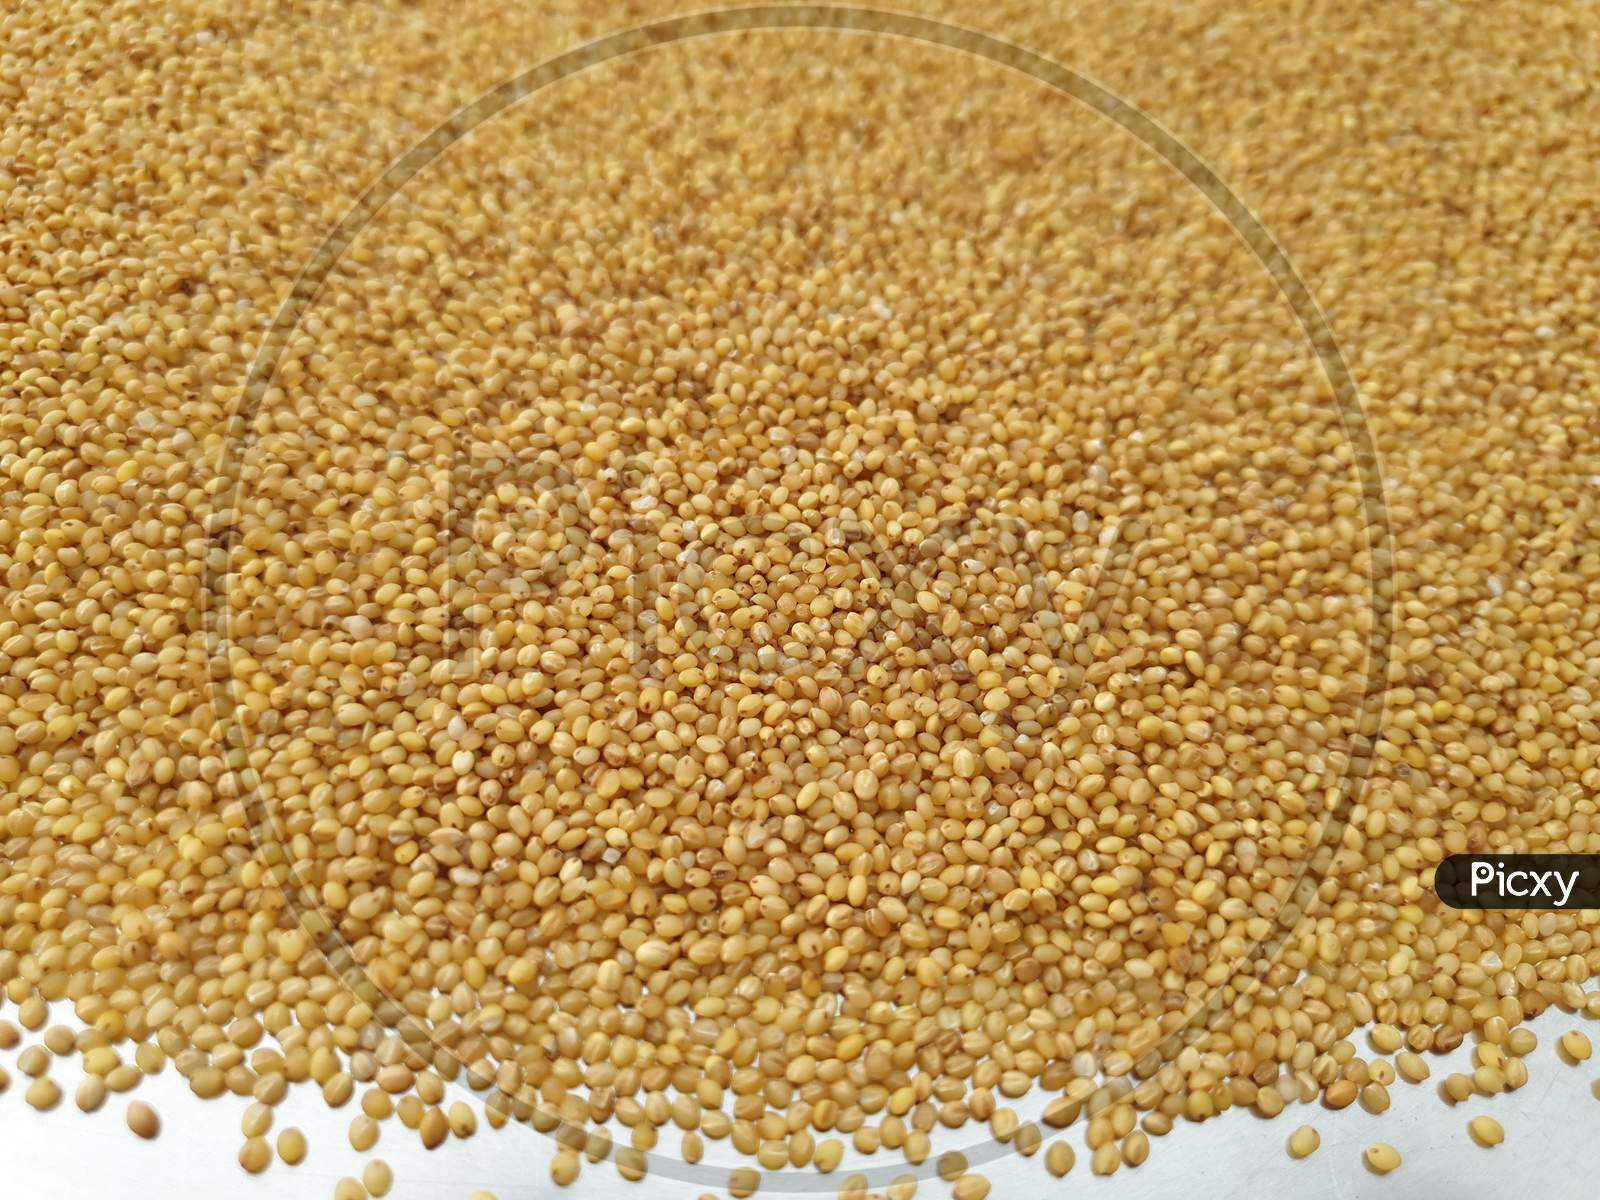 These are the foxtail millet